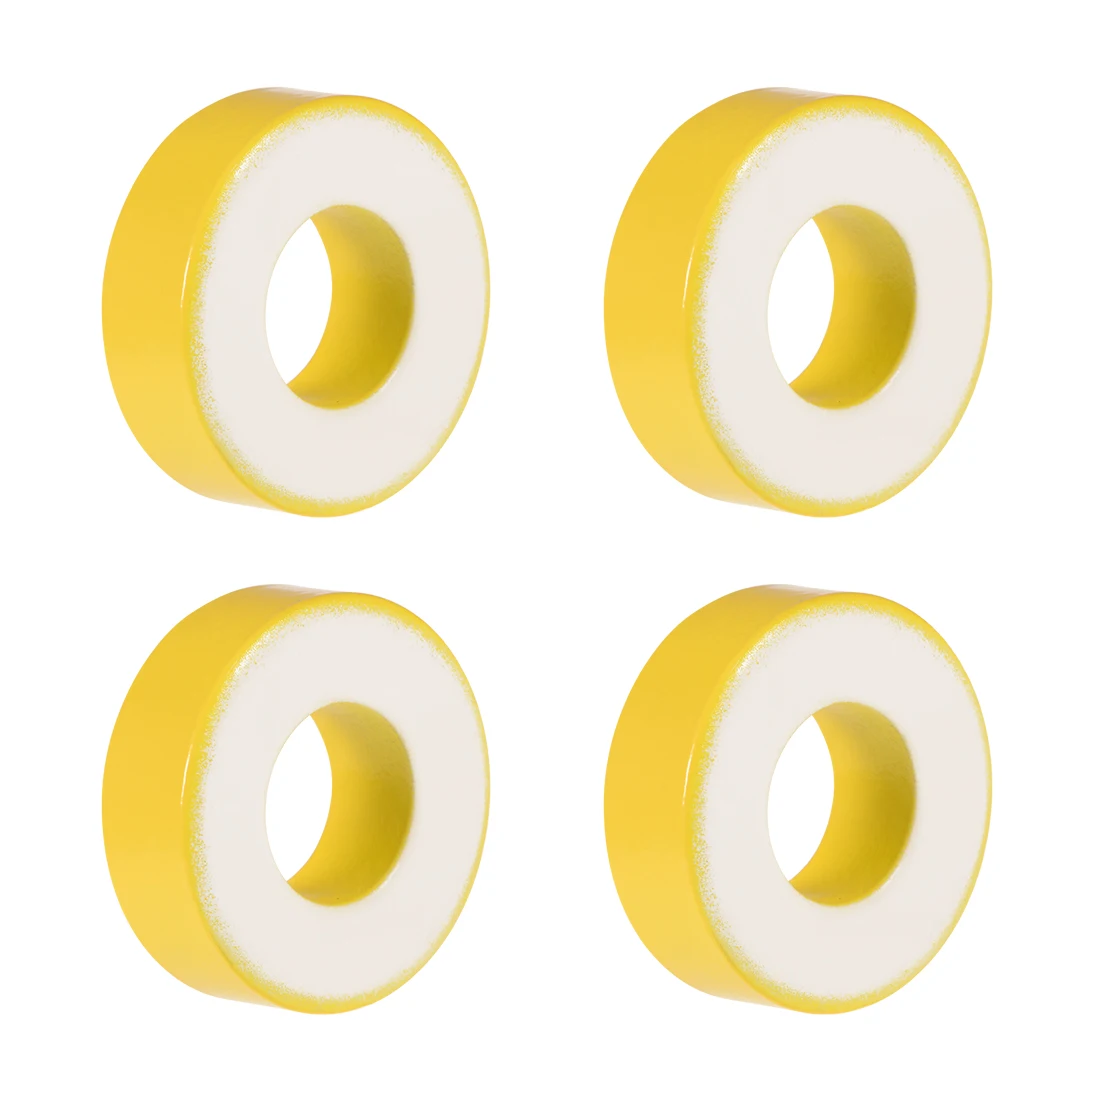 

4pcs 16x33.6x11.3mm Ferrite Ring Iron Powder Toroid Cores Yellow White Inductor Ferrite Rings for Power Transformers Inductors